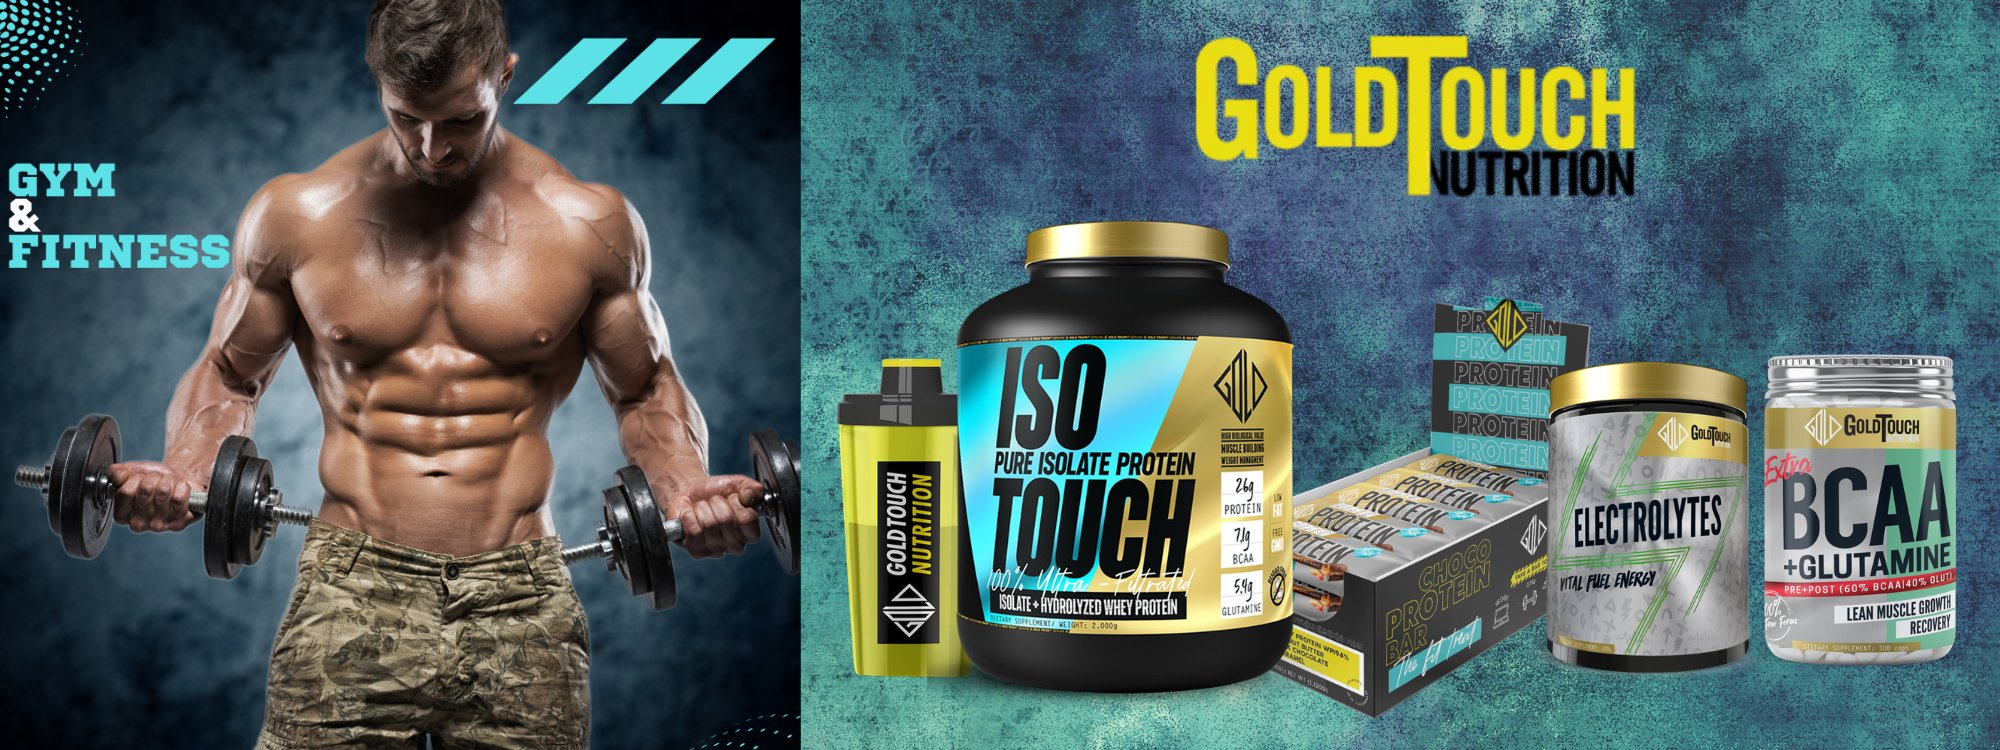 Goldtouch-Nutrition-